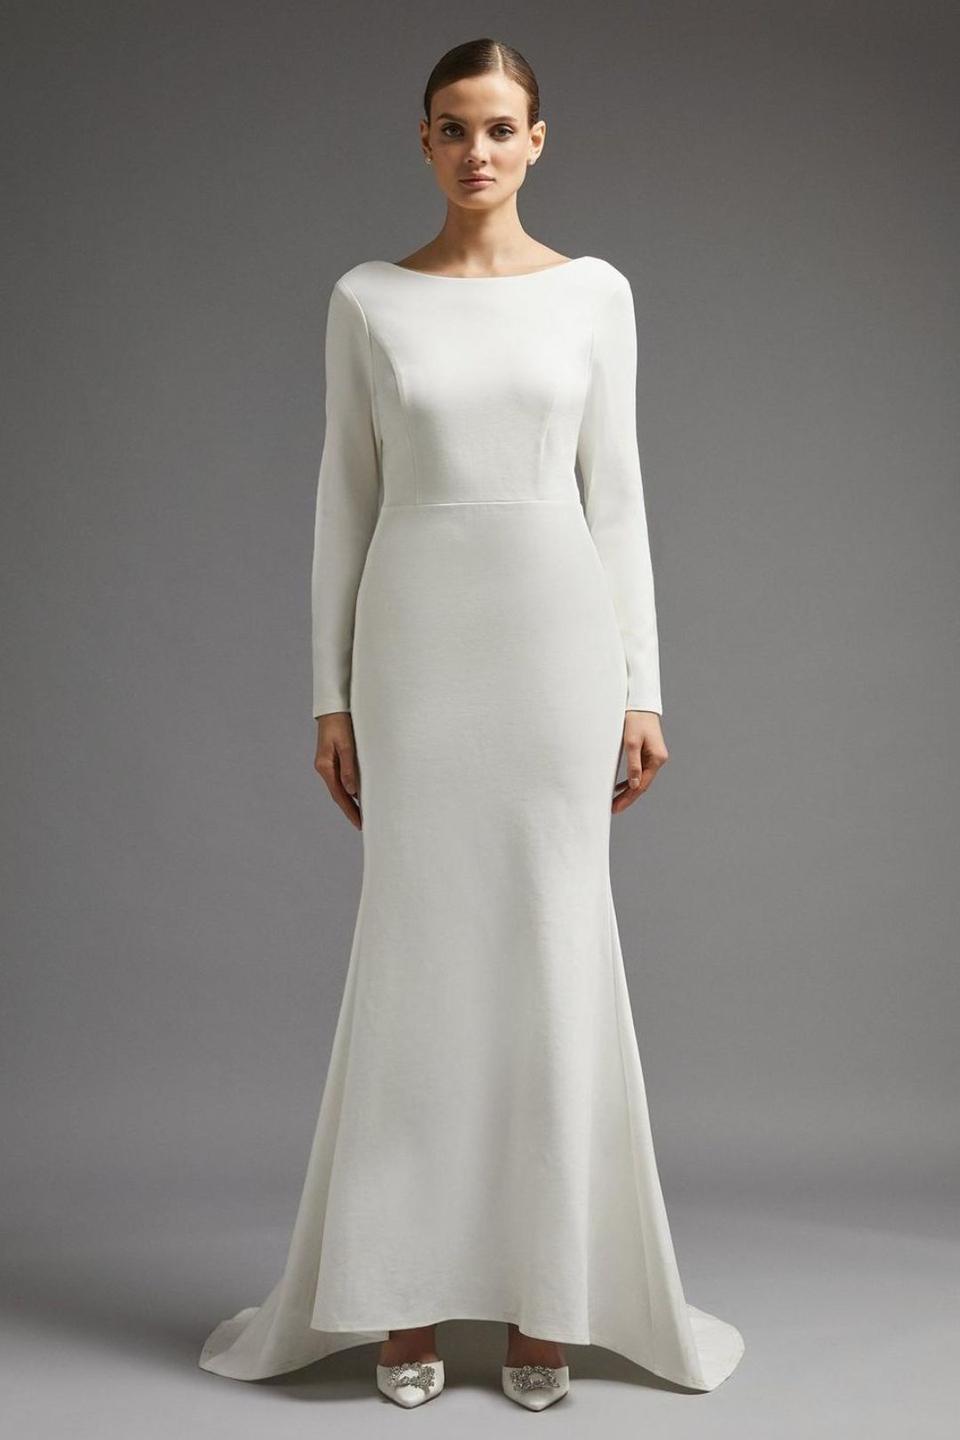 40 of the Best Simple Wedding Dresses for Understated Brides - hitched ...